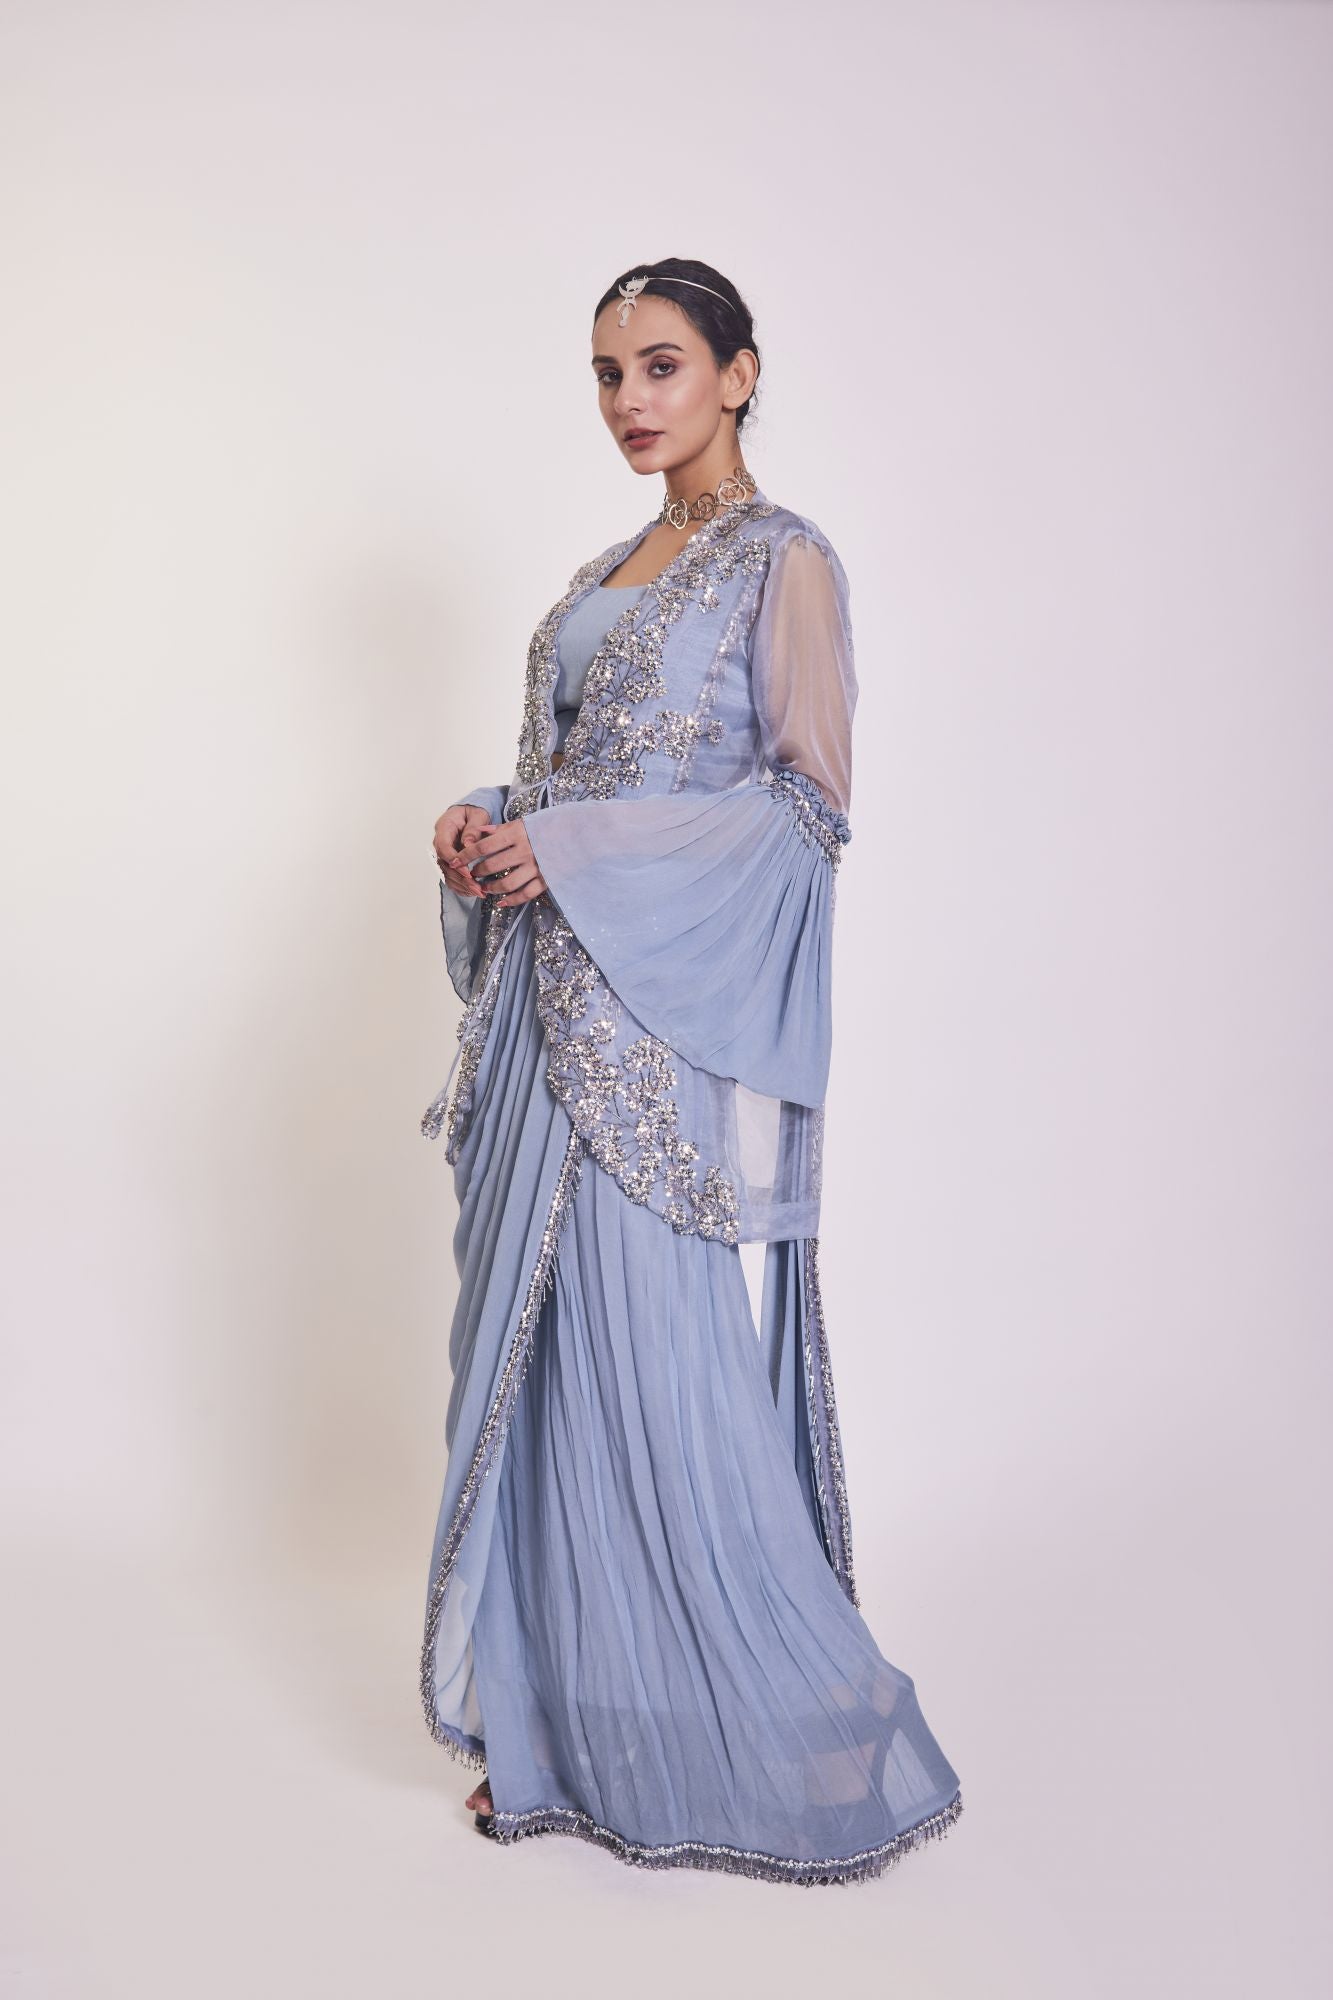 Shop blue georgette saree with ruffled sleeves cape. Make a fashion statement on festive occasions and weddings with designer sarees, designer suits, Indian dresses, Anarkali suits, palazzo suits, designer gowns, sharara suits, and embroidered sarees from Pure Elegance Indian fashion store in the USA.